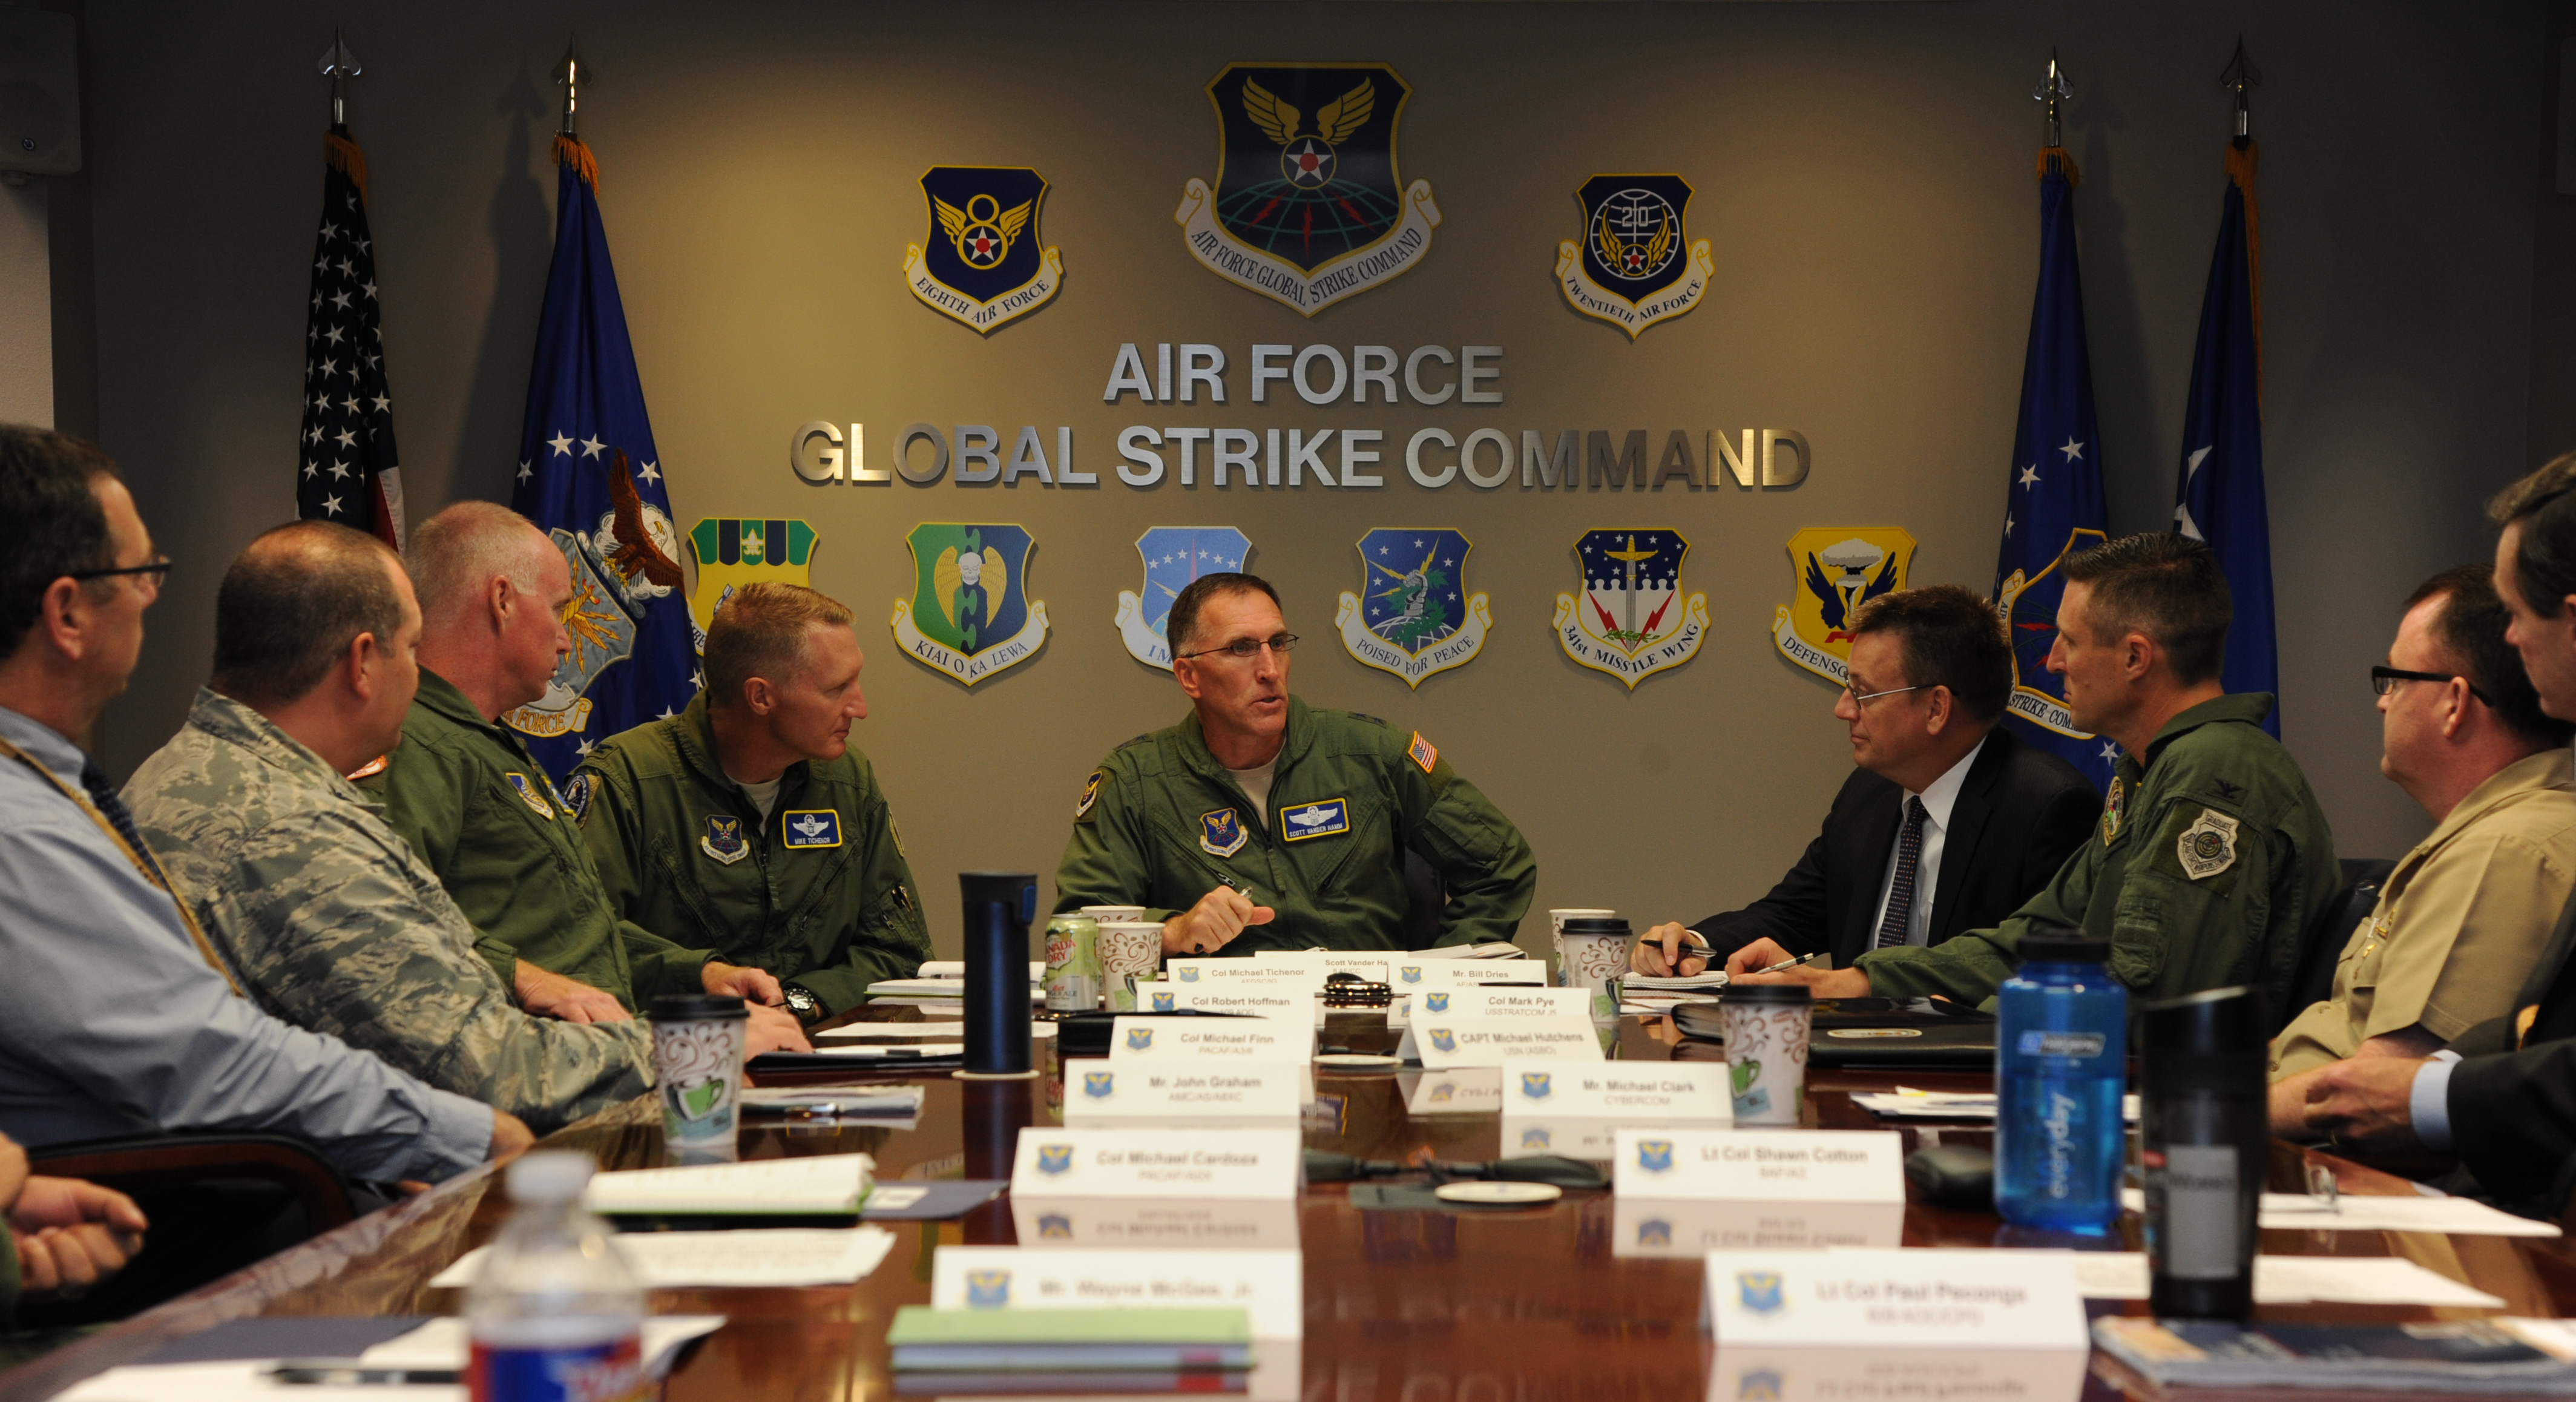 Maj. Gen. Scott Vander Hamm, center, and Col. Michael Tichenor, left of center, discuss expectations with the joint planning group Oct. 6, 2014, during the Global Strike Workshop at Barksdale Air Force Base, La. The workshop organizers crafted plans which integrated Air Force Global Strike Command assets into a joint environment, focusing on how to best utilize the total force in the most effective and efficient manner. Hamm is the 8th Air Force commander and Tichenor is the AFGSC inspector general. (U.S. Air Force photo/1st Lt. Christopher Mesnard) 